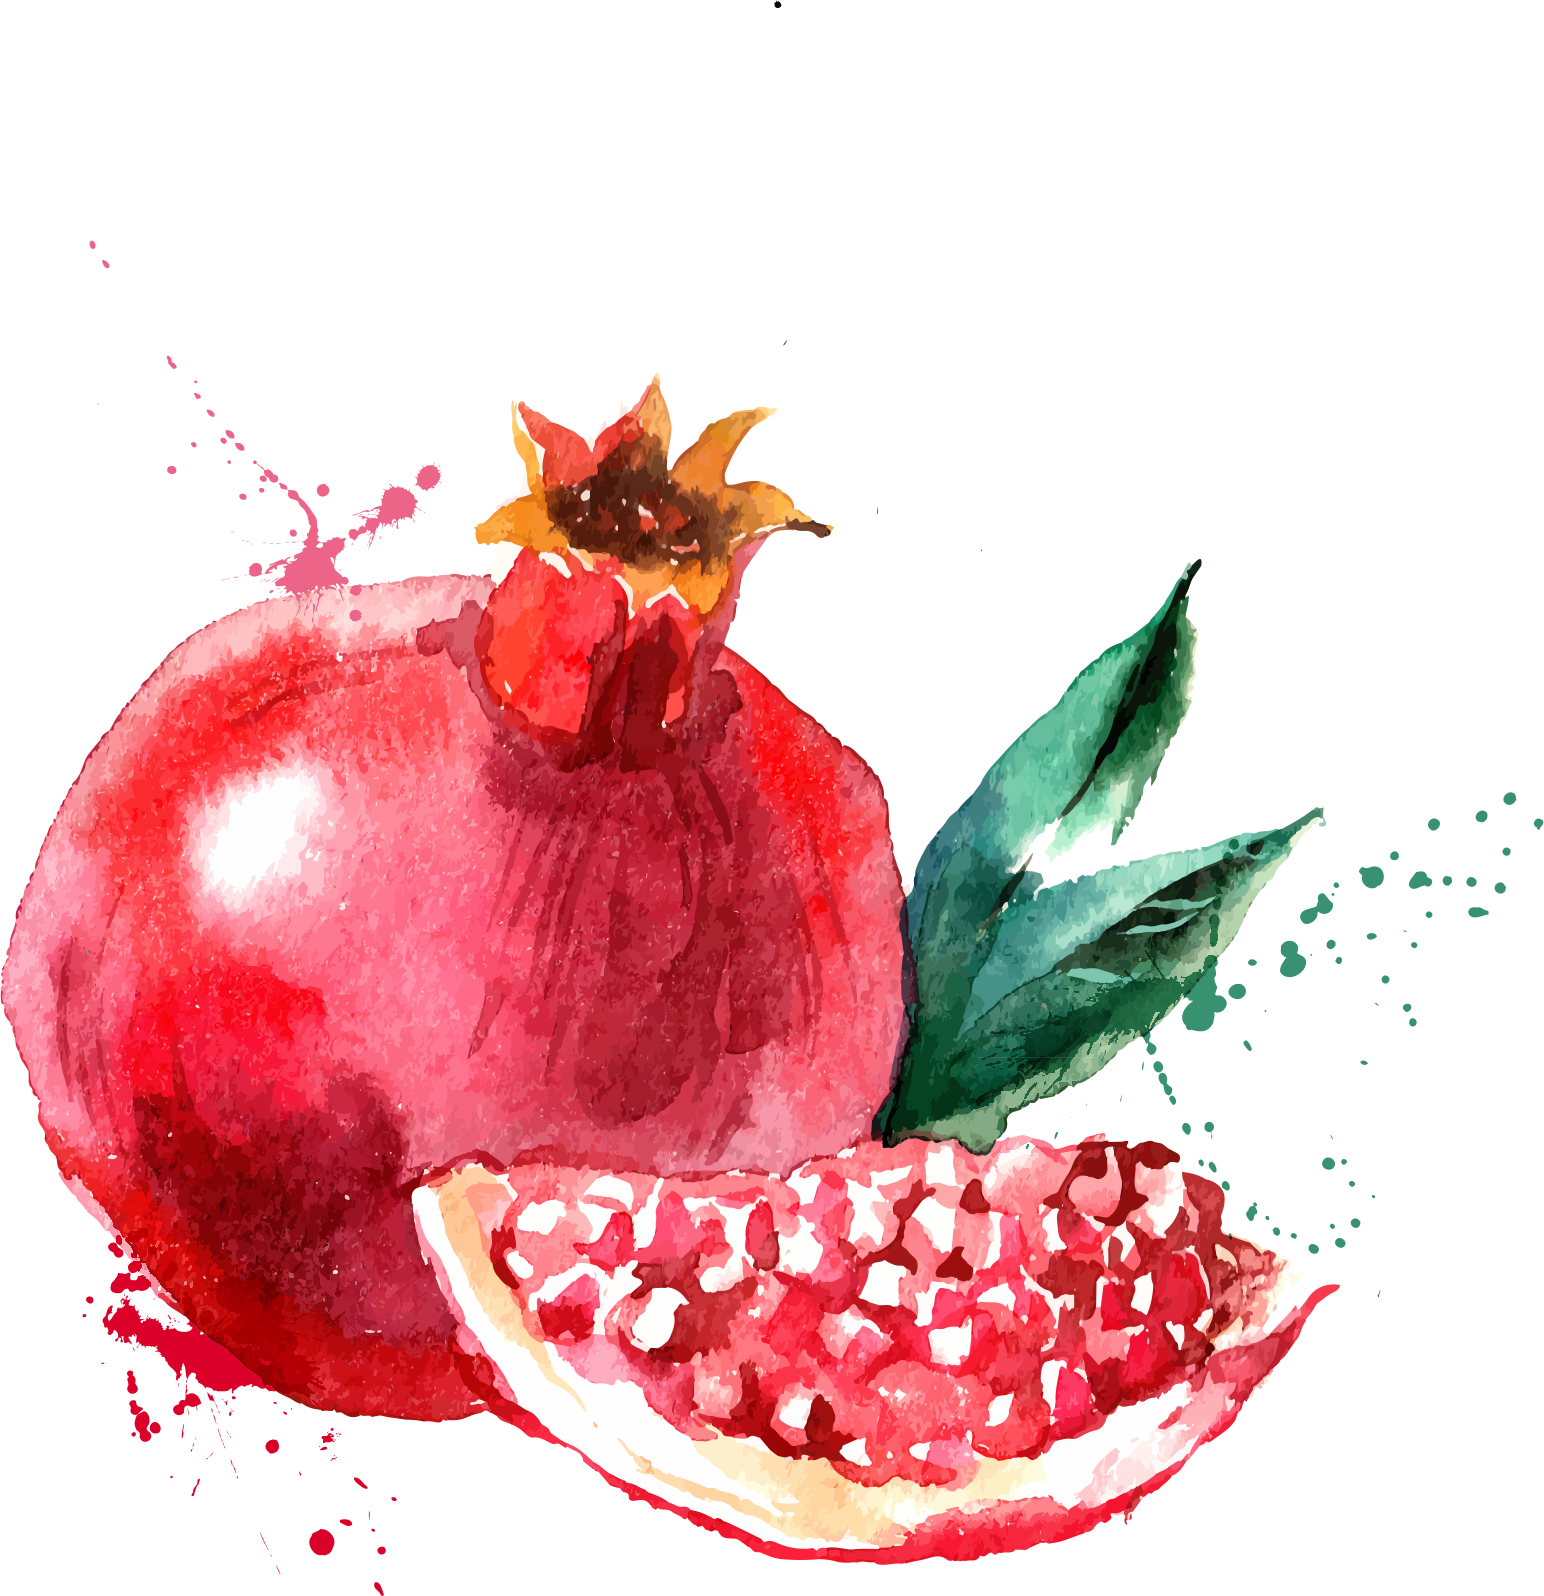 A Watercolor Of A Pomegranate And A Slice Of Pomegranate